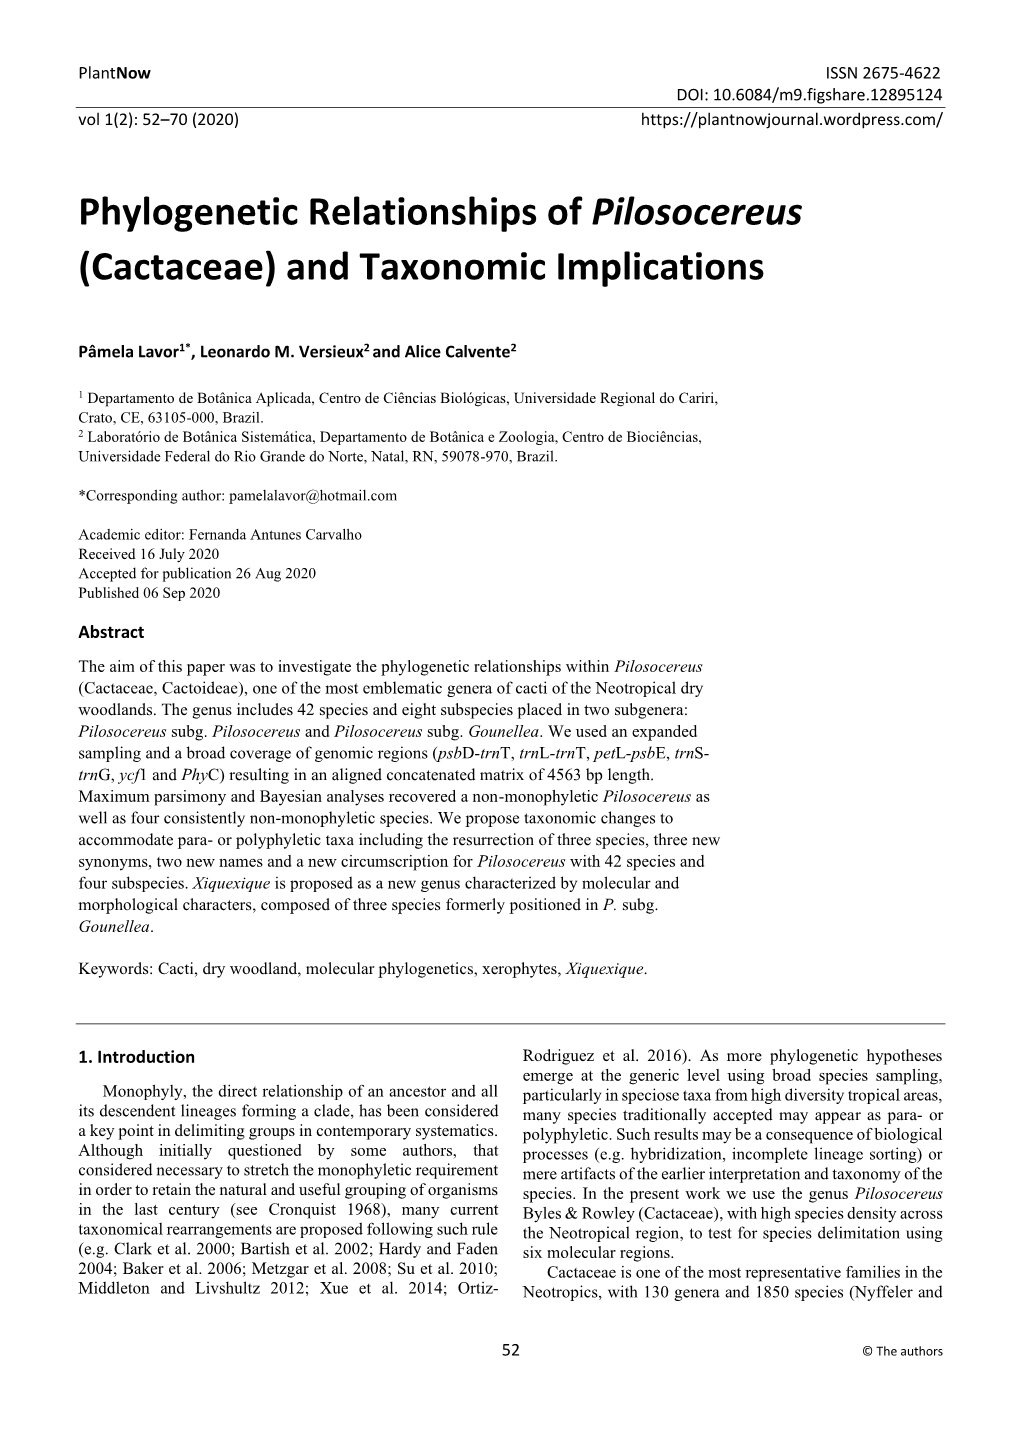 Phylogenetic Relationships of Pilosocereus (Cactaceae) and Taxonomic Implications